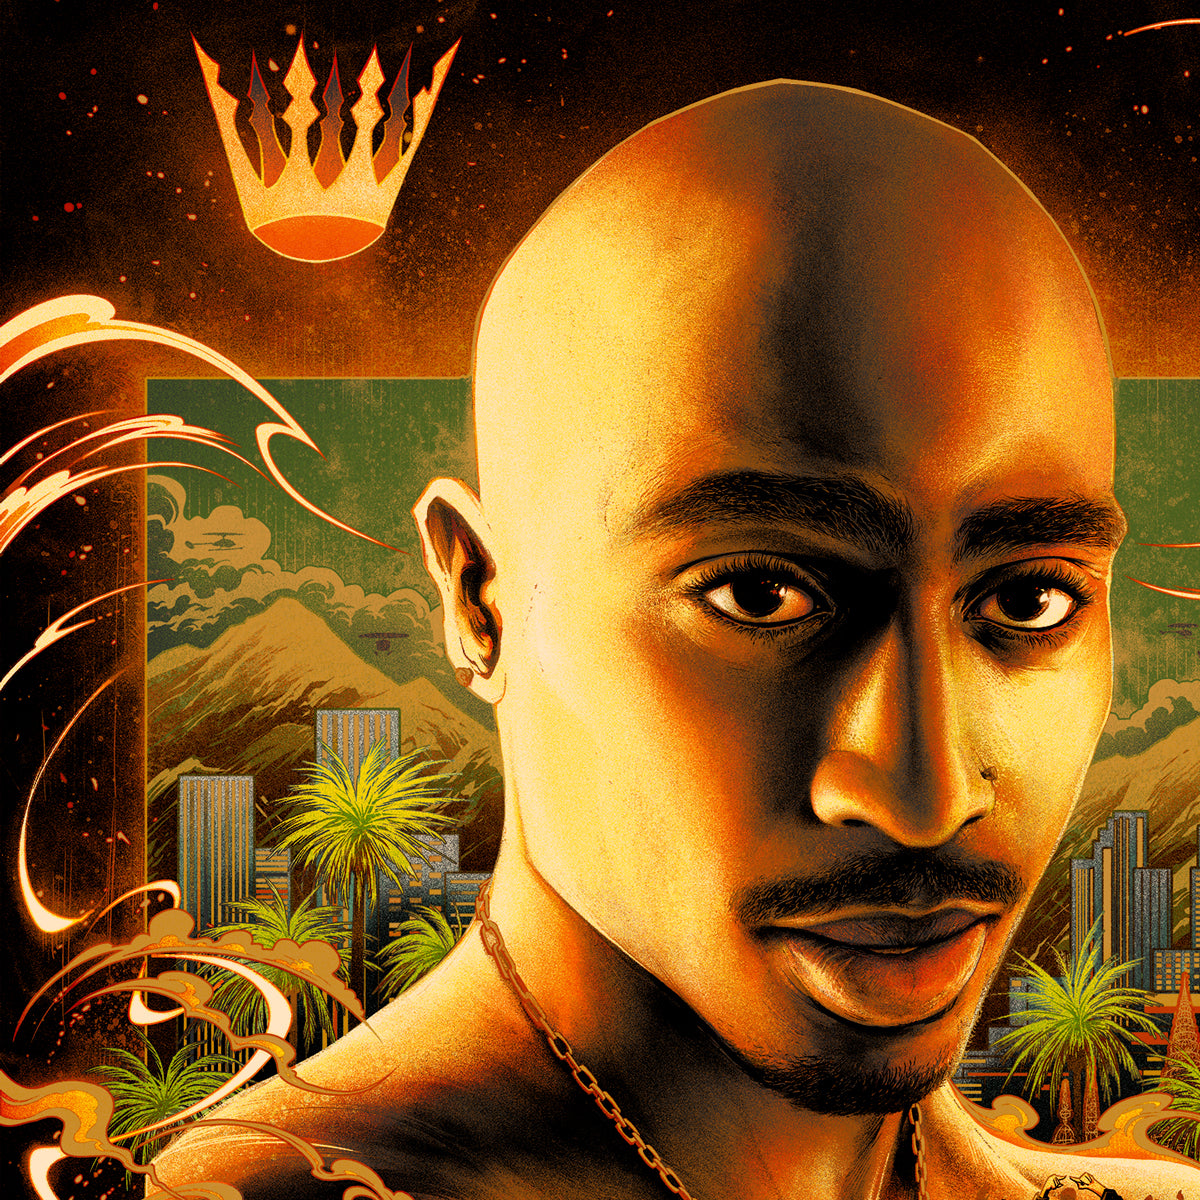 2Pac California Love 25th Anniversary (Golden State Foil Edition)